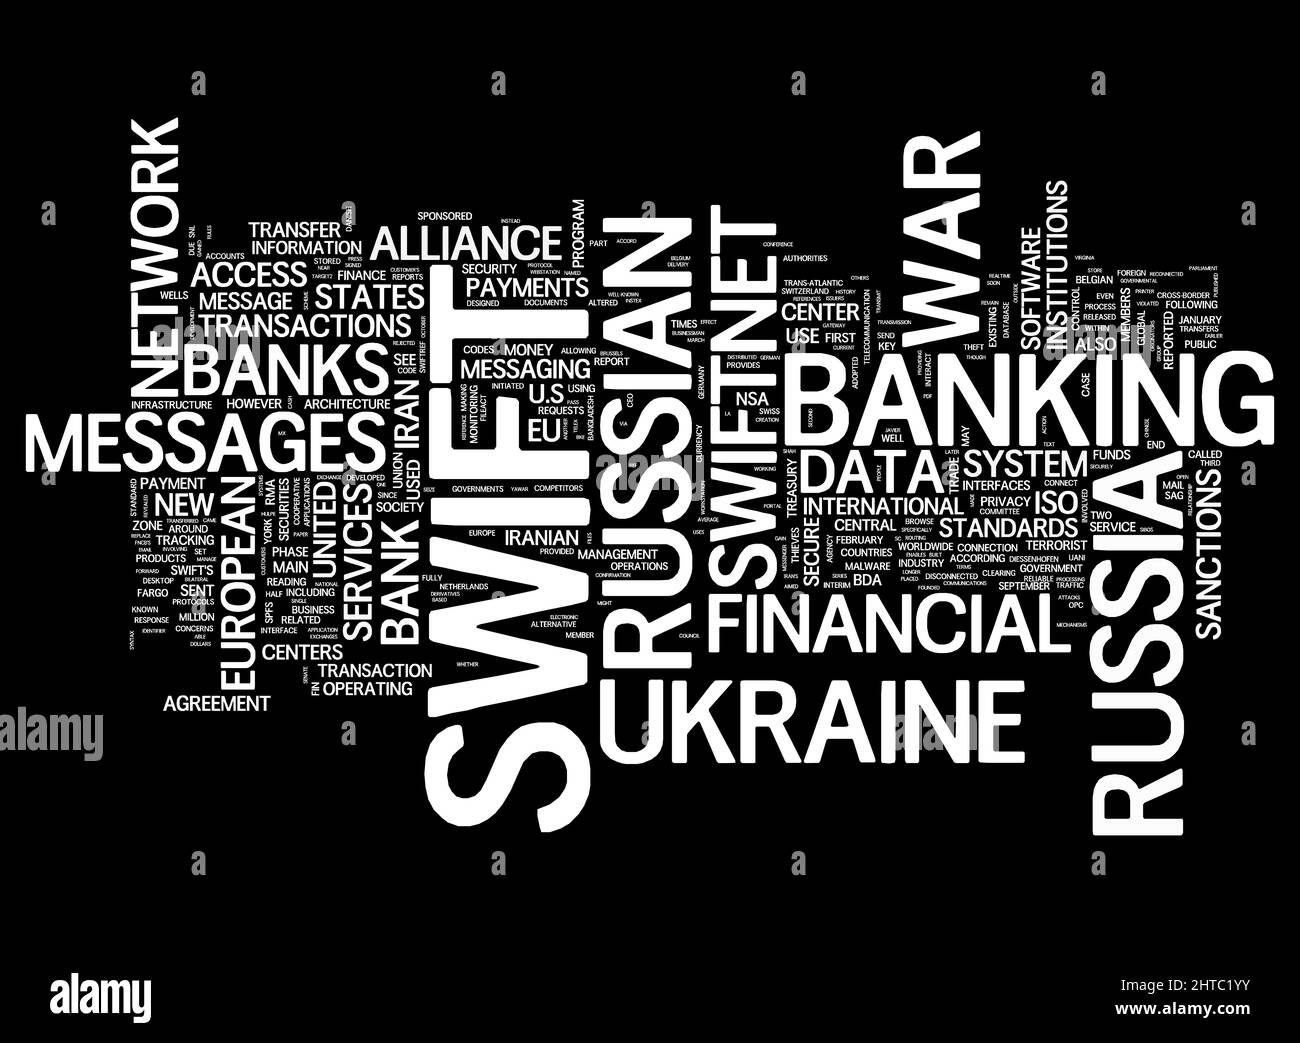 SWIFT - Society for Worldwide Interbank Financial Telecommunication - collage of word concepts Stock Photo